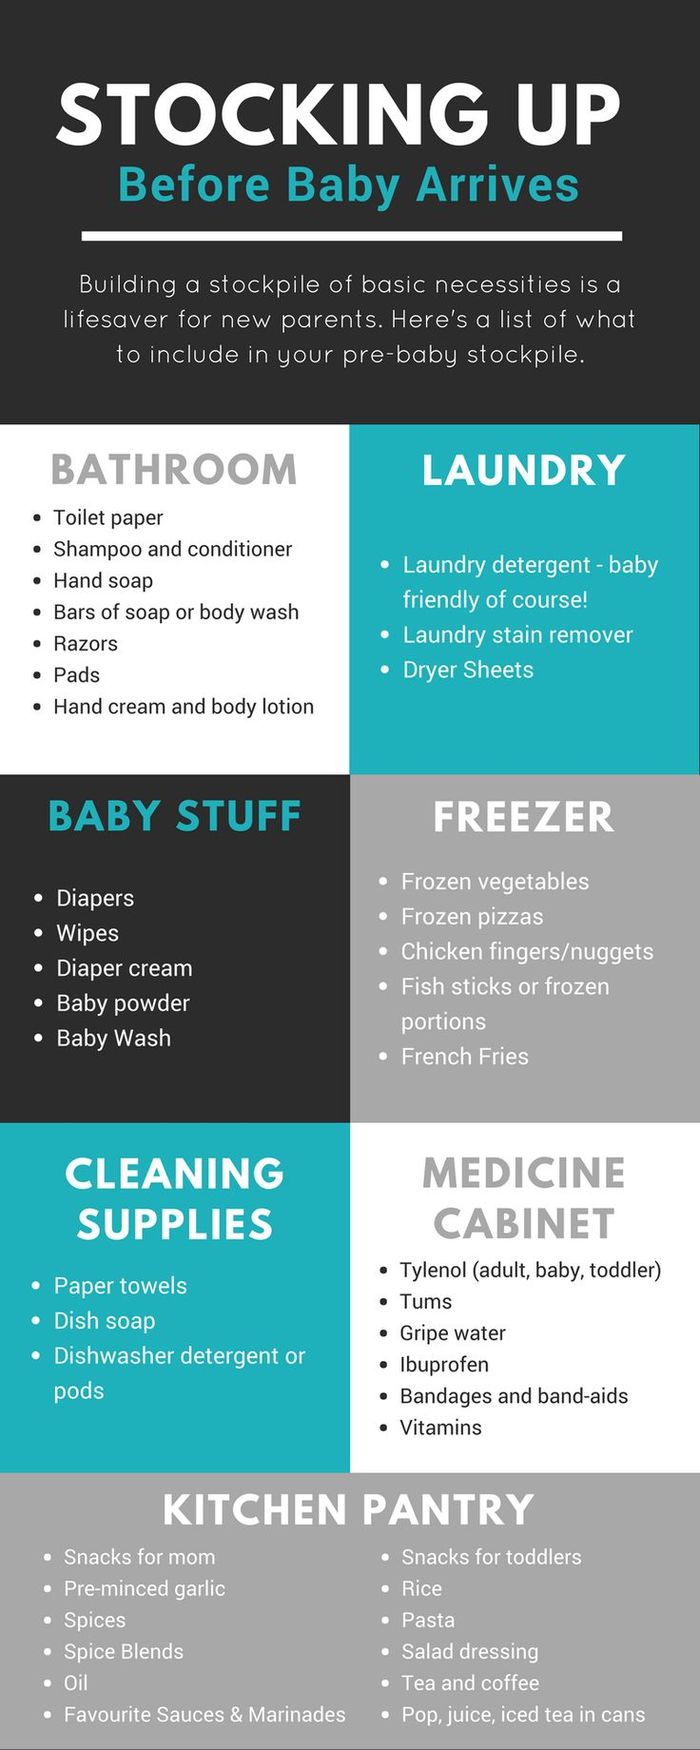 Household Items to Stockpile Before Baby Arrives — Good Life of a Housewife